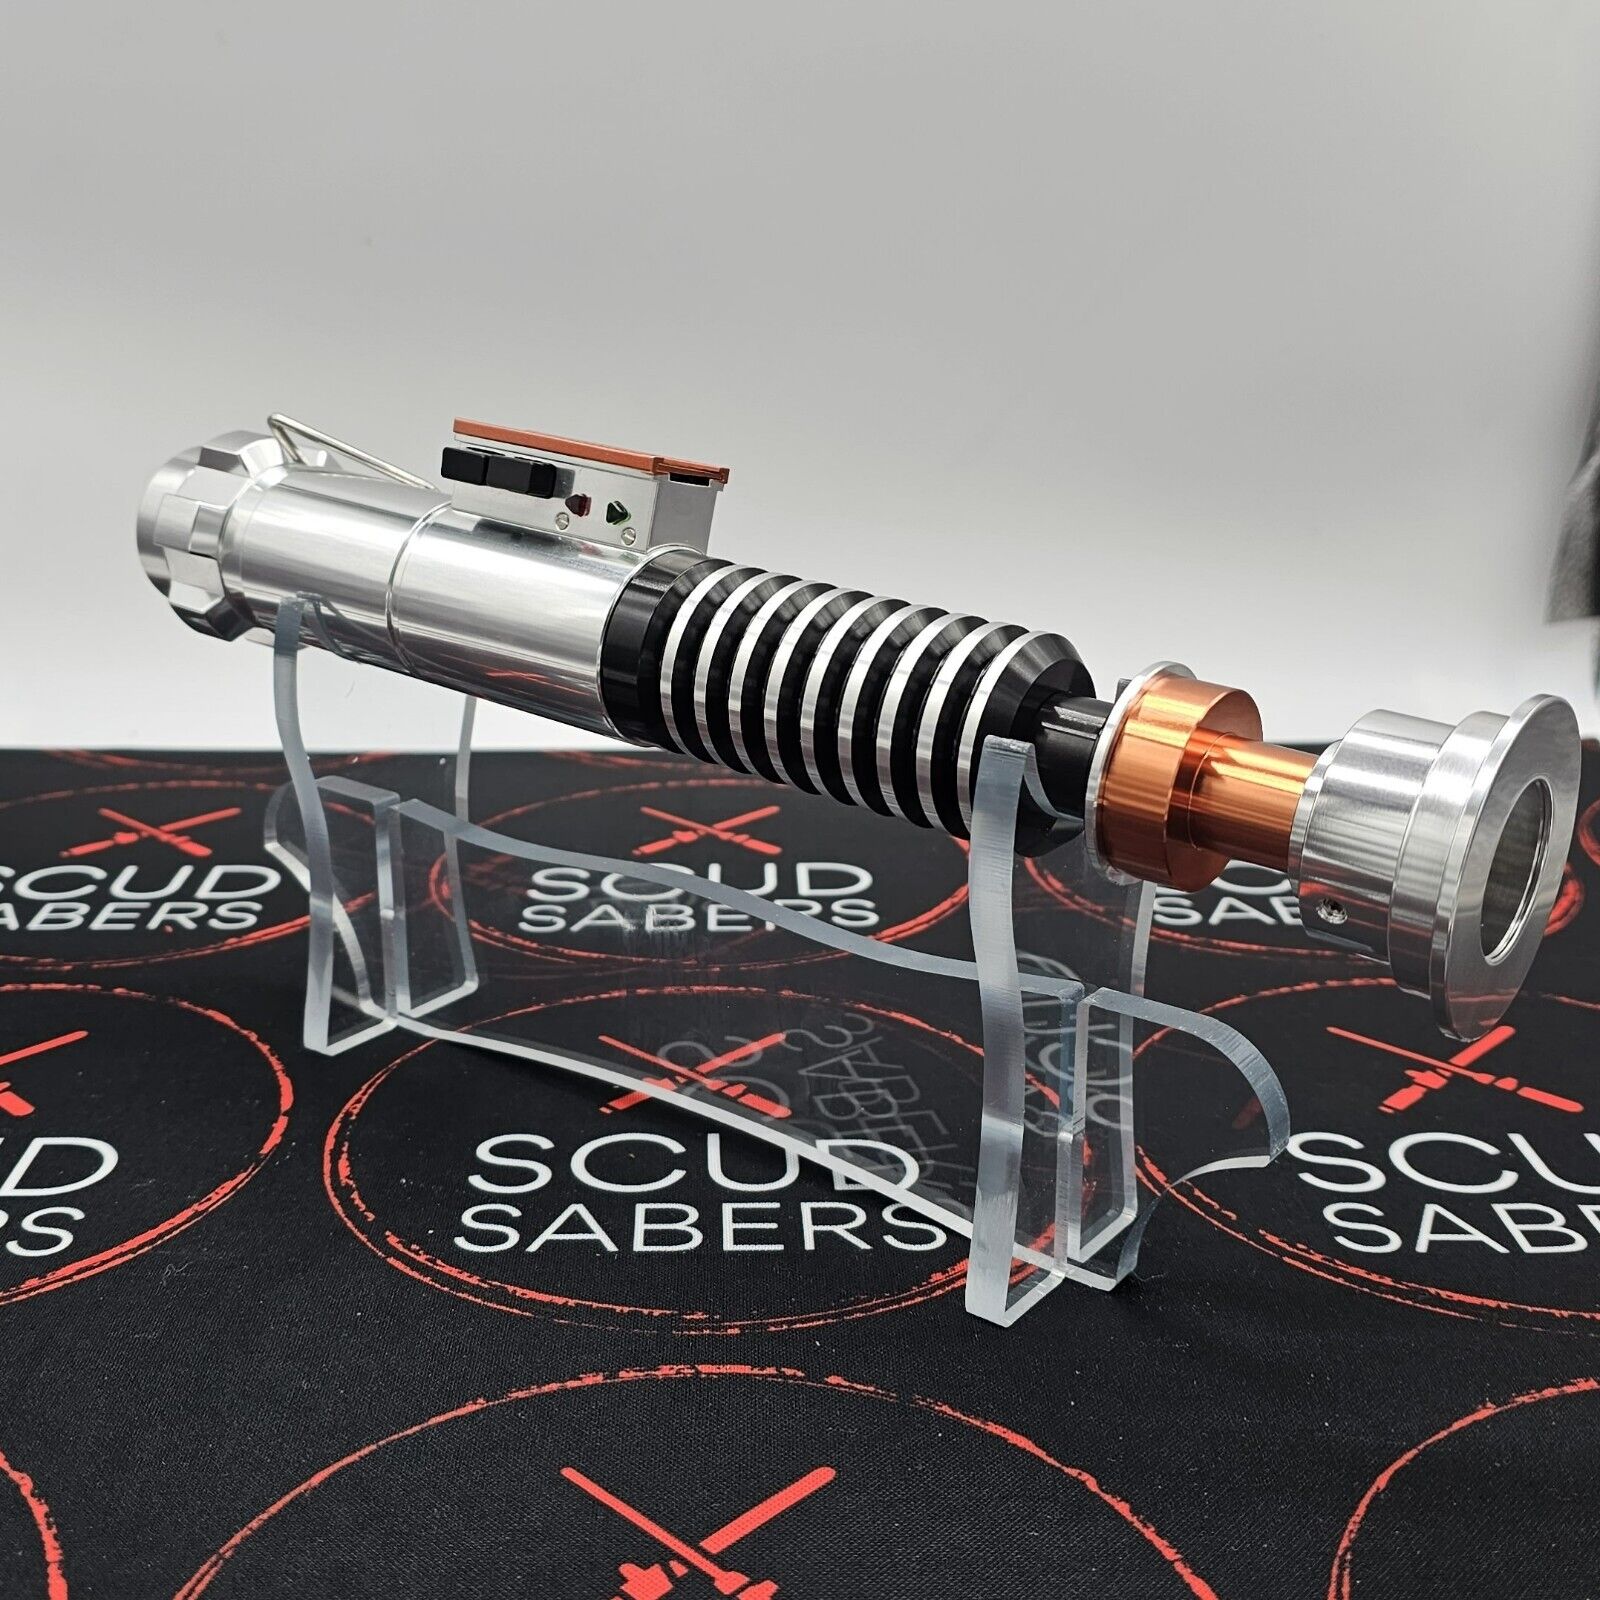 Xenopixel v3 Lightsaber - Knight 2.0 (Luke replica) with 34 fonts and Bluetooth